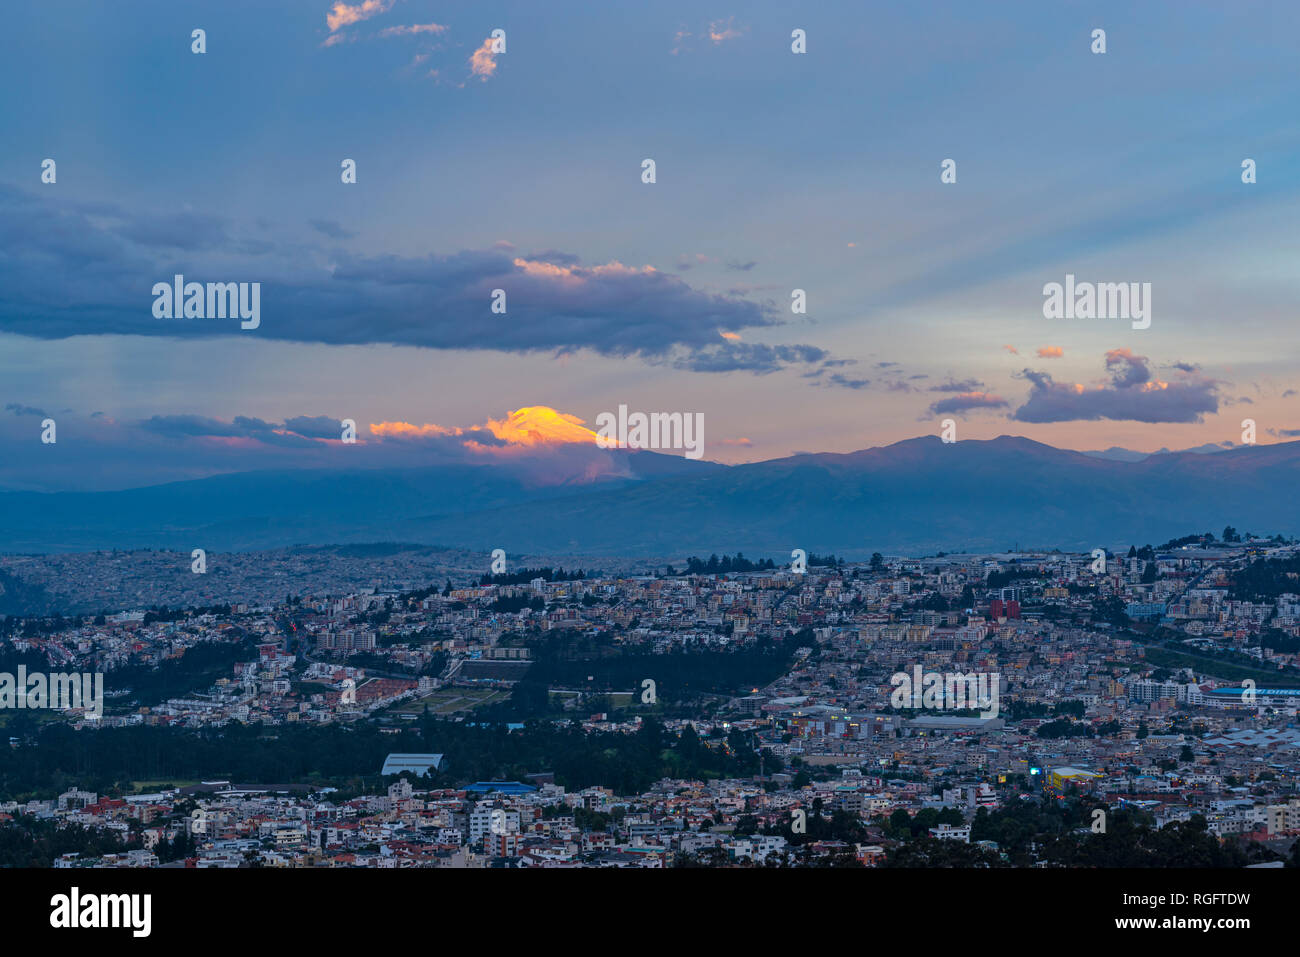 Cityscape of Quito during the blue hour at sunset with the peak of the Cayambe volcano illuminated at sunset in the Andes mountain range, Ecuador. Stock Photo